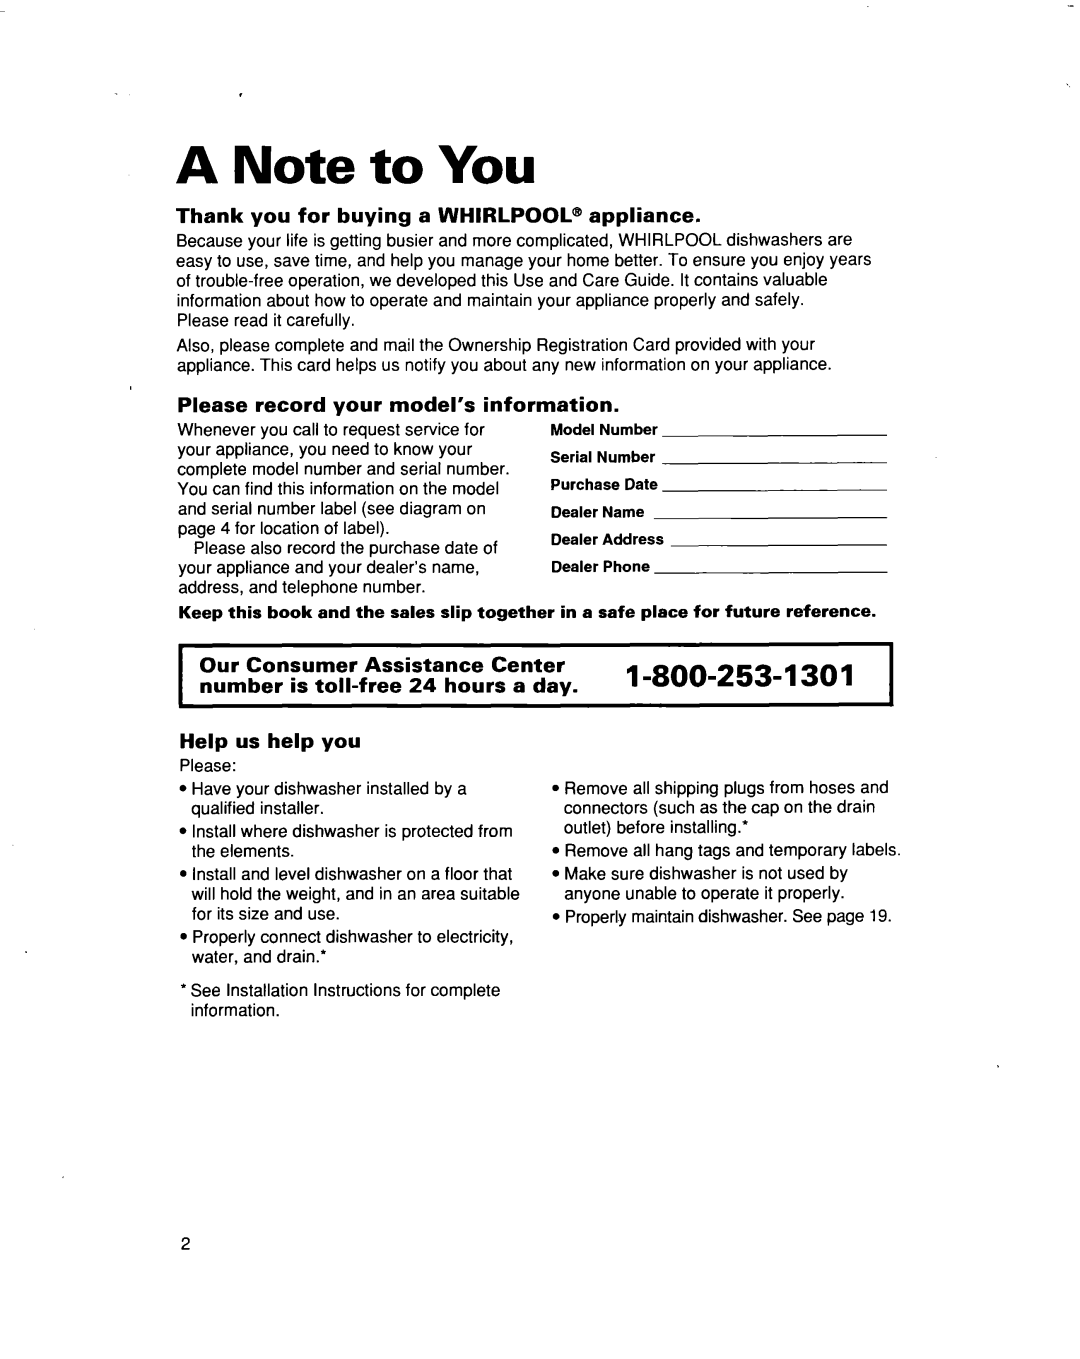 Whirlpool 915 warranty A Note to You 